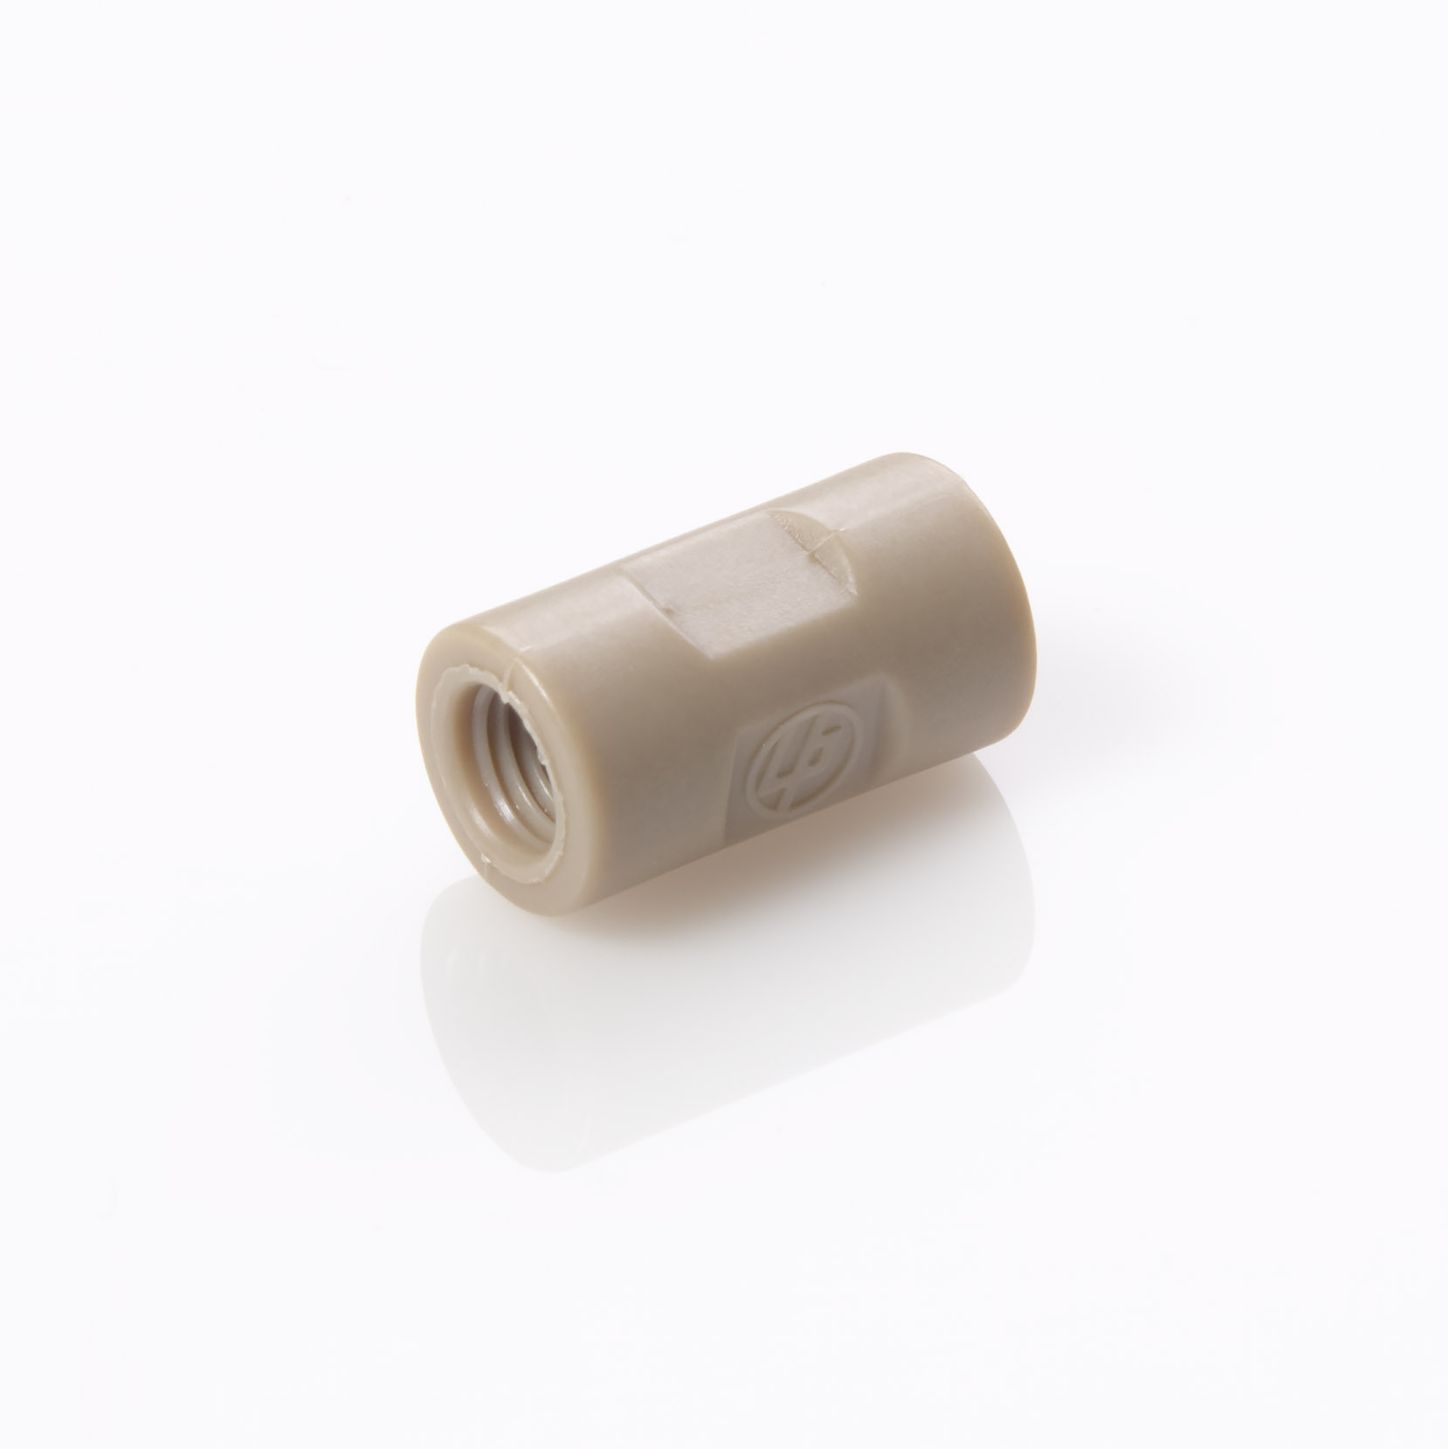 Connector Union PEEK™ 0.020 (0.50mm) Thru-Hole with 1/4-28 Ports (Union Body Only)